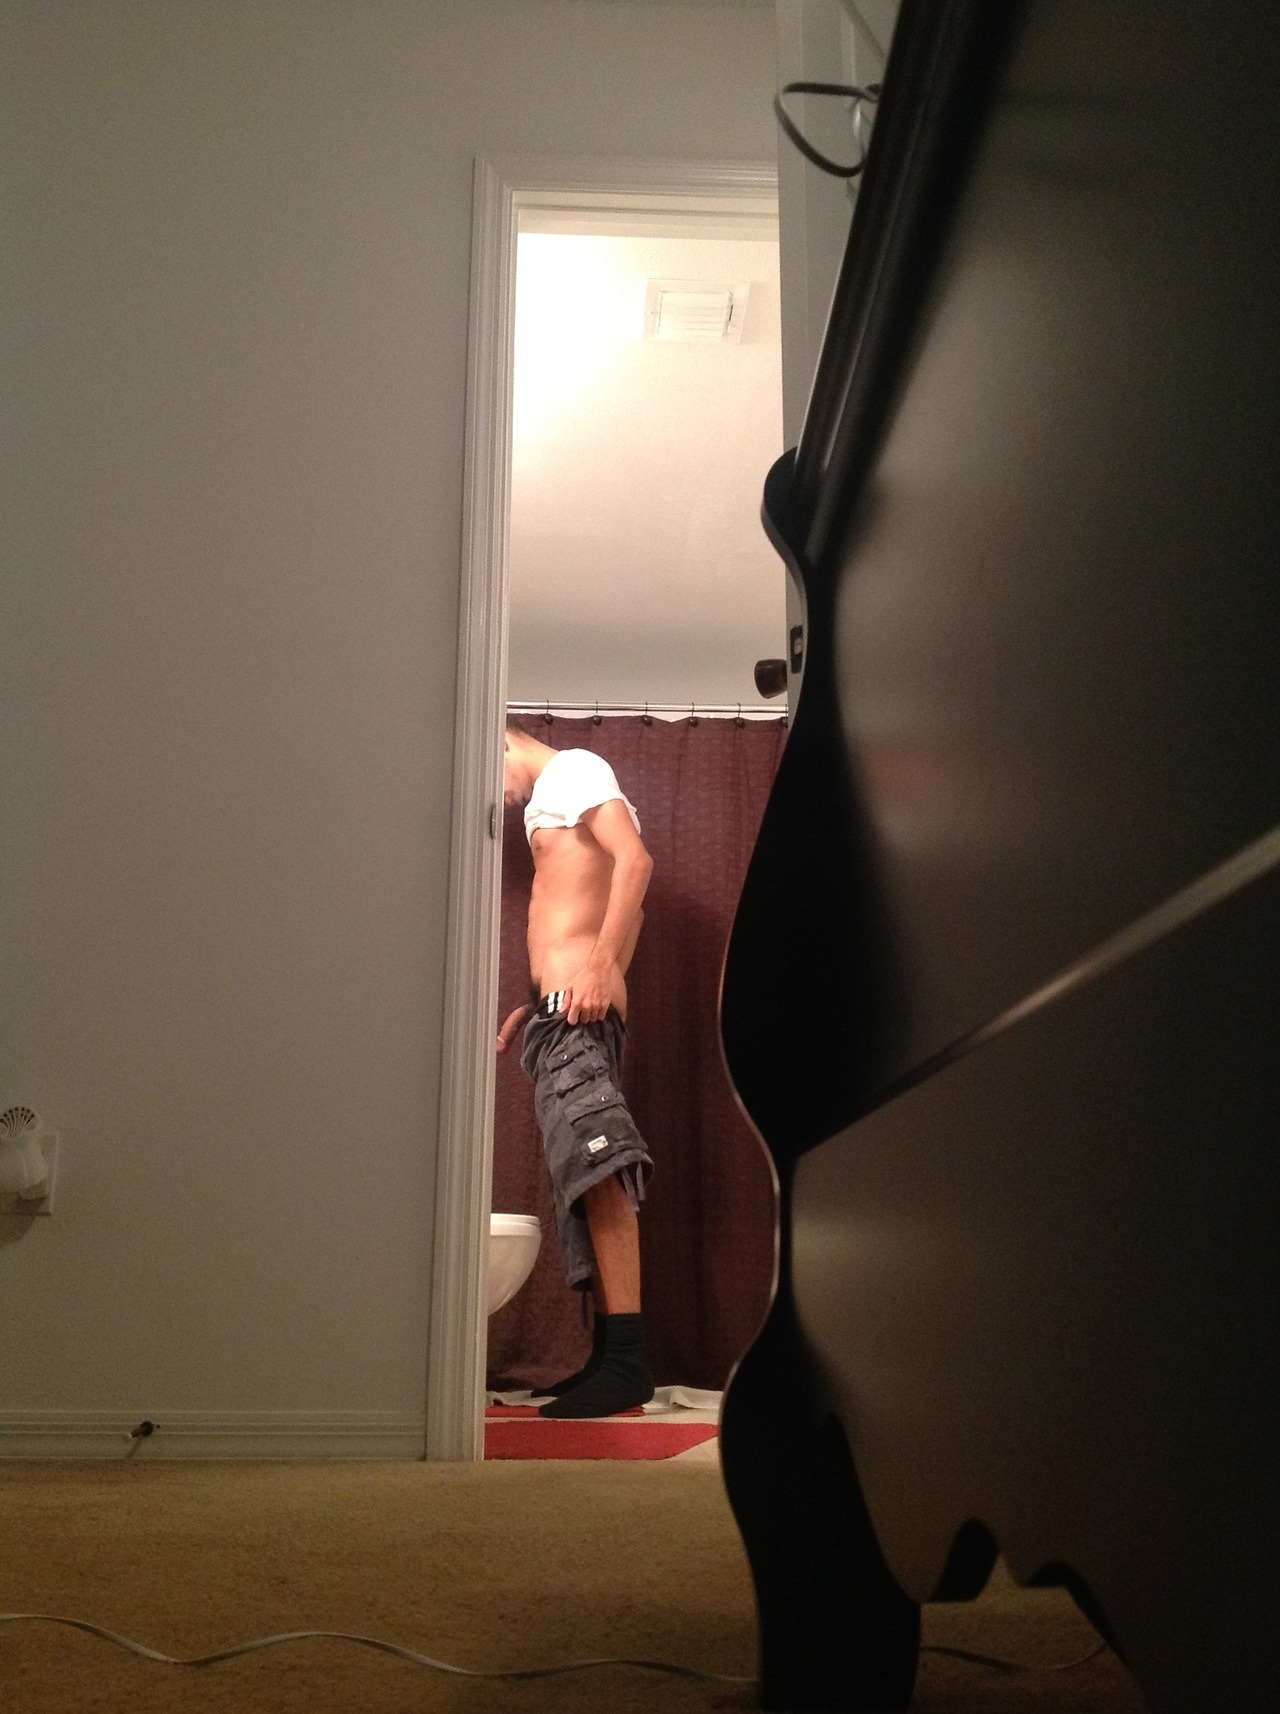 Spying on a naked roomie